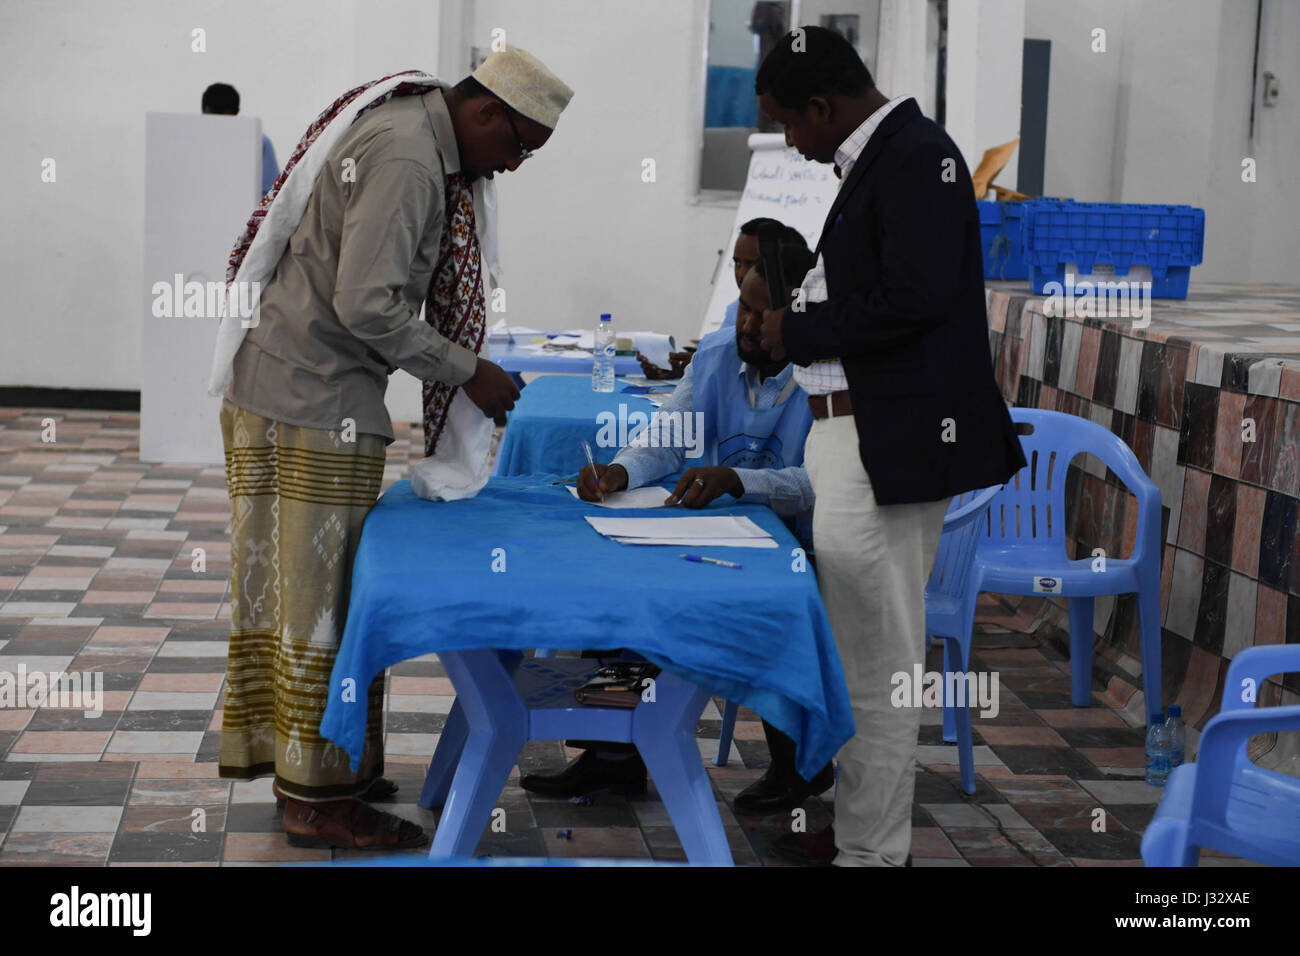 Electoral officials check the accreditation card of a delegate during the electoral process to choose Somaliland's representatives to the Upper House of the Federal Parliament in Mogadishu, Somalia, on January 8, 2017. AMISOM Photo / Omar Abdisalan Stock Photo